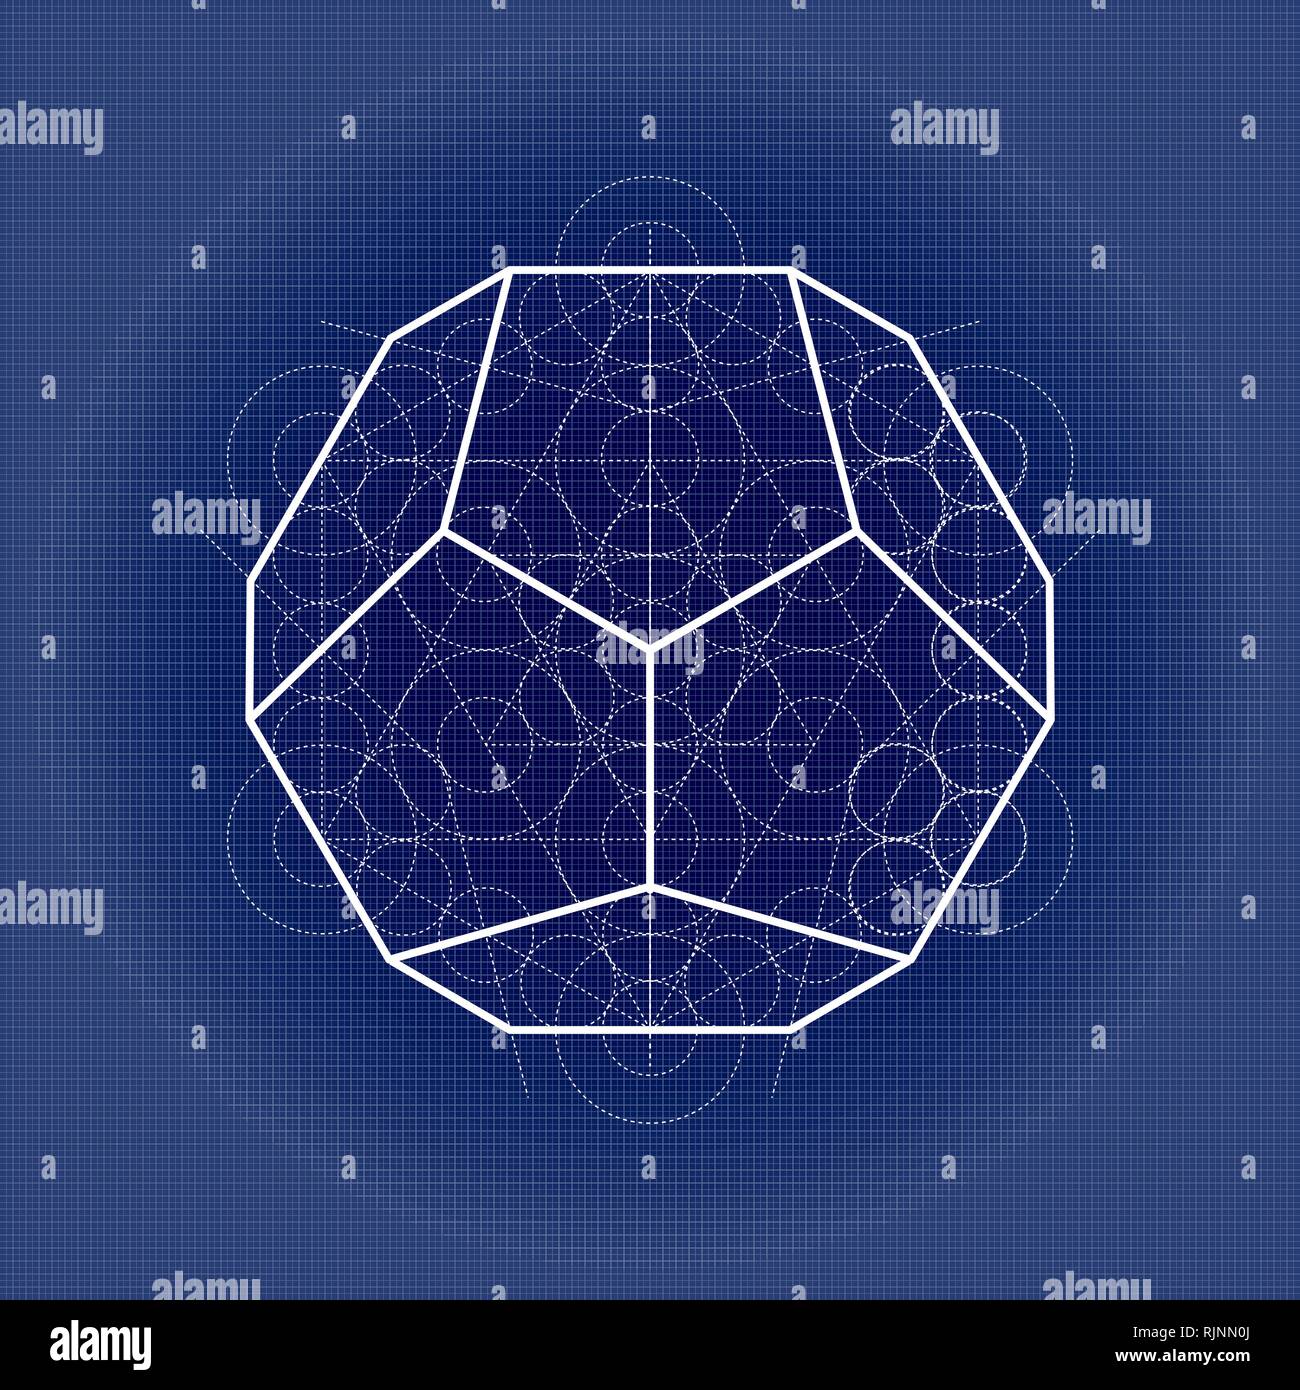 Dodecahedron from Metatrons cube sacred geometry illustration on technical paper Stock Vector